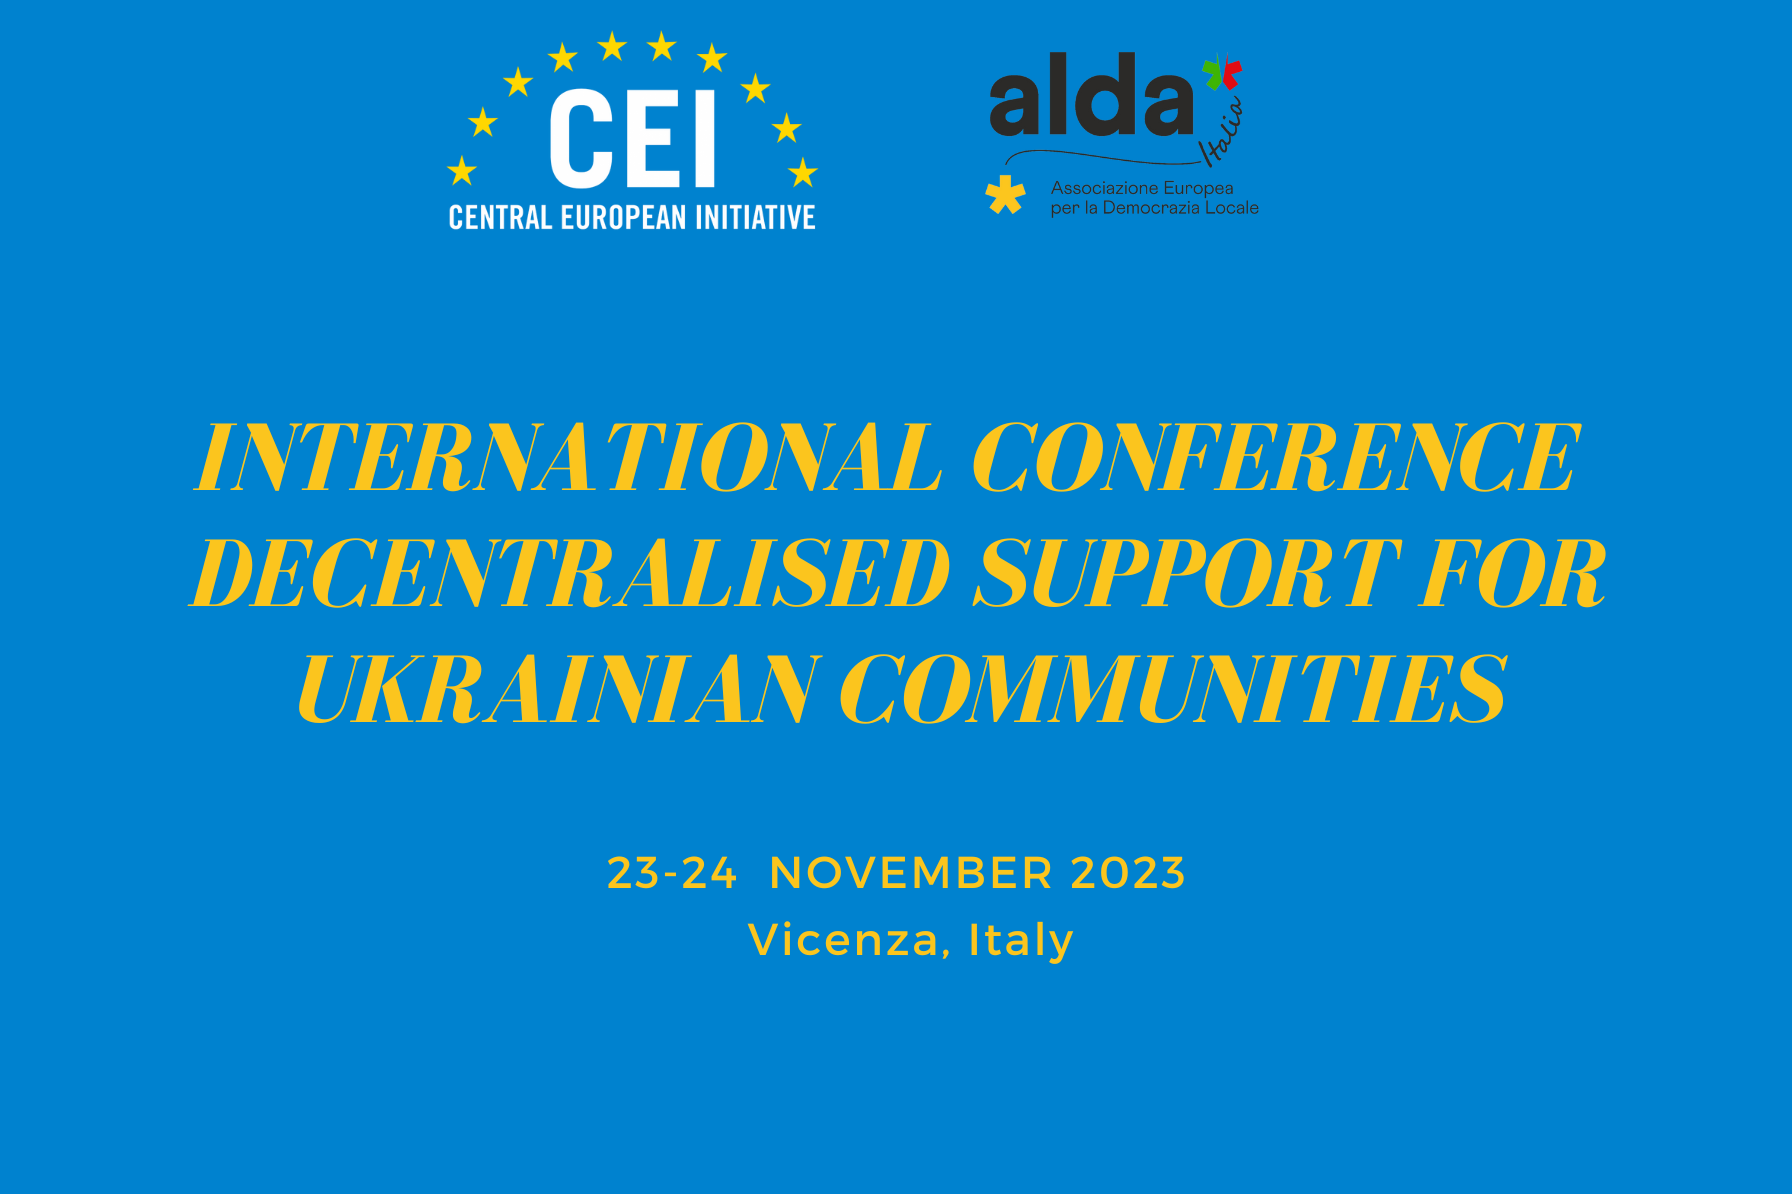 ALDA organises the CEI International Conference - "Decentralised support for Ukrainian communities" with the support of the Central European Initiative, U LEAD with Europe, and the municipality of Vicenza.